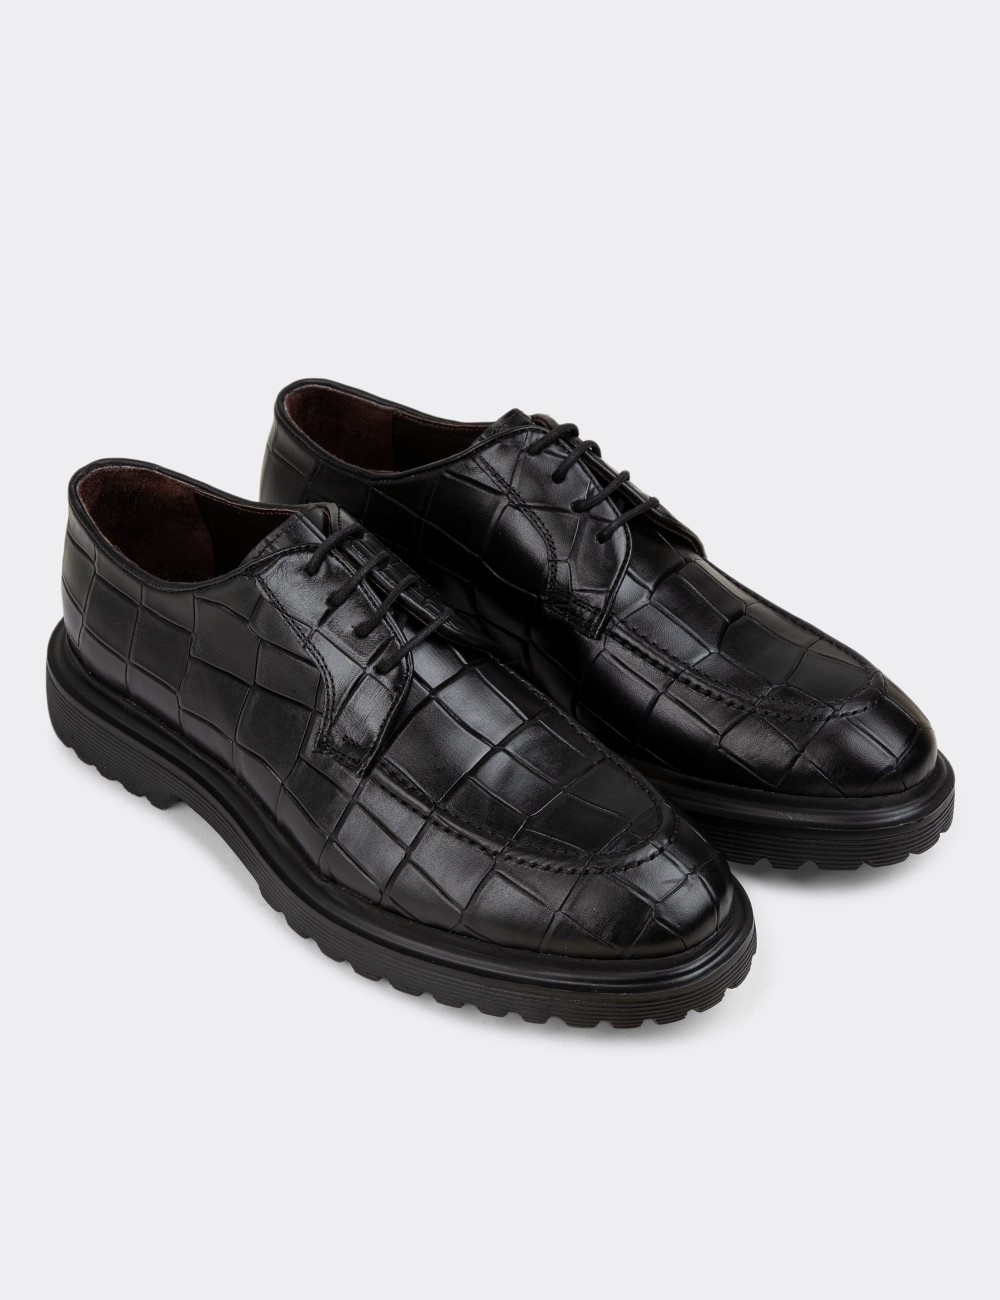 Black Leather Lace-up Shoes - 01931MSYHE02